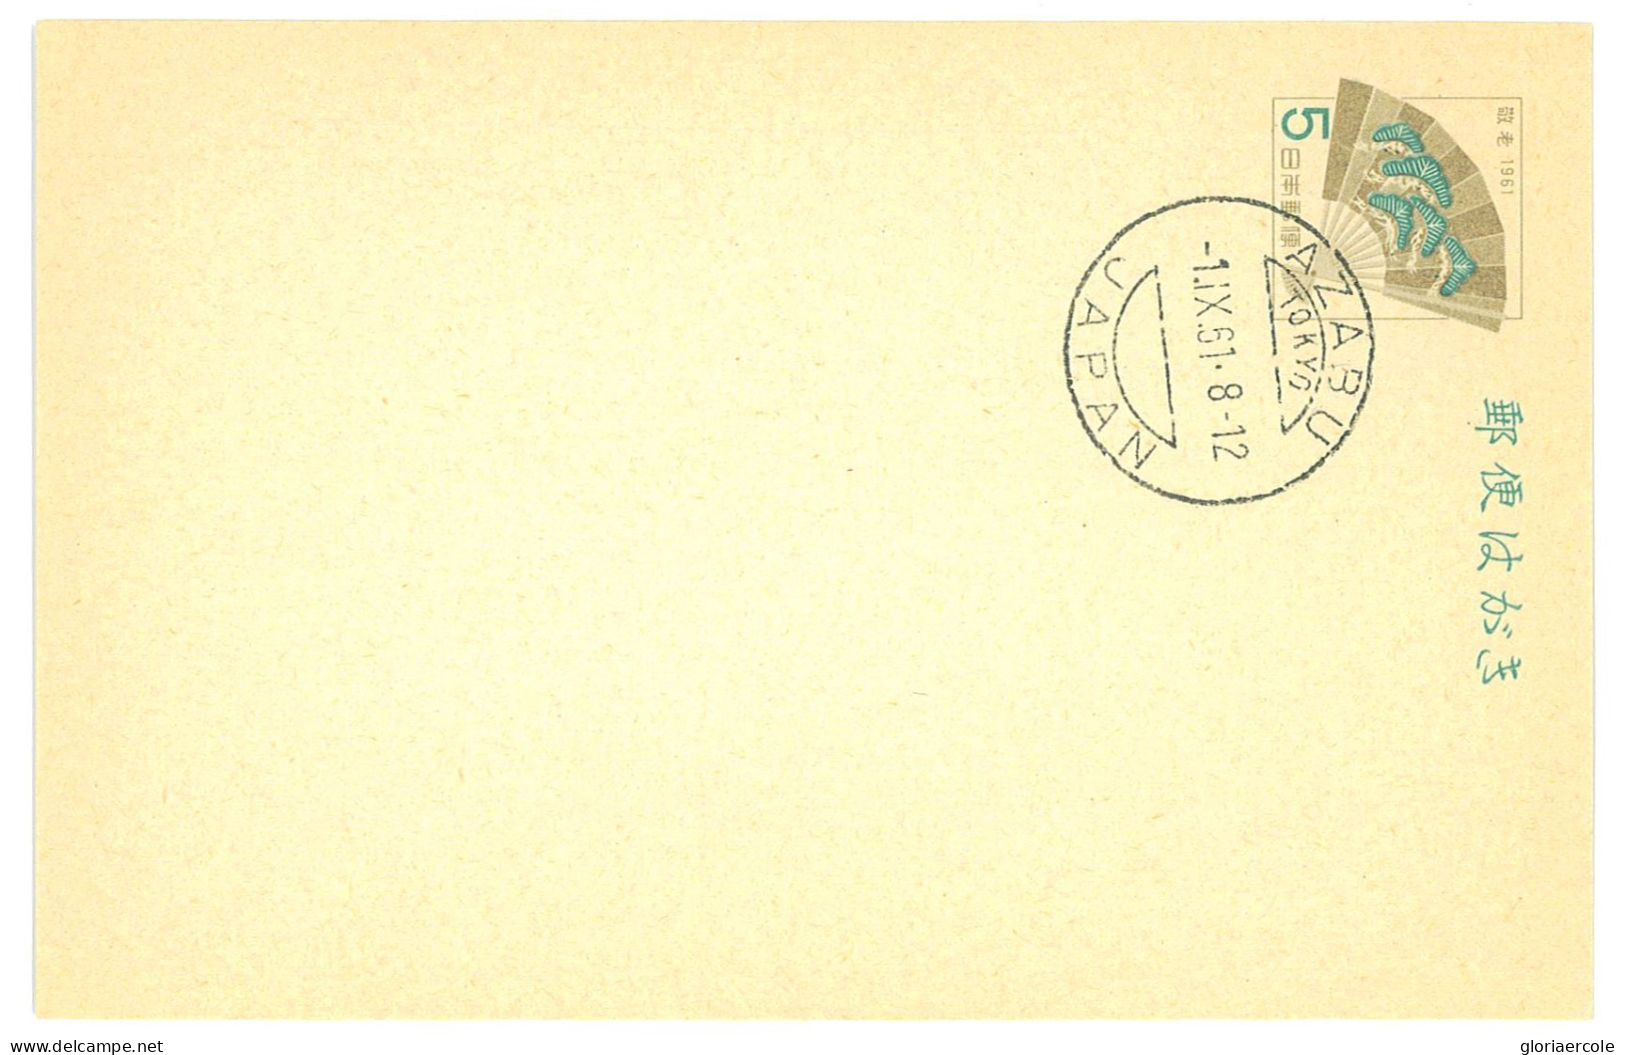 P2806 - JAPAN, SMALL LOT OF POSTAL STATIONARY USED WITH FAVOR CANCELLATIONS 10 DIFFERENT PIECES 1950/60 - Covers & Documents